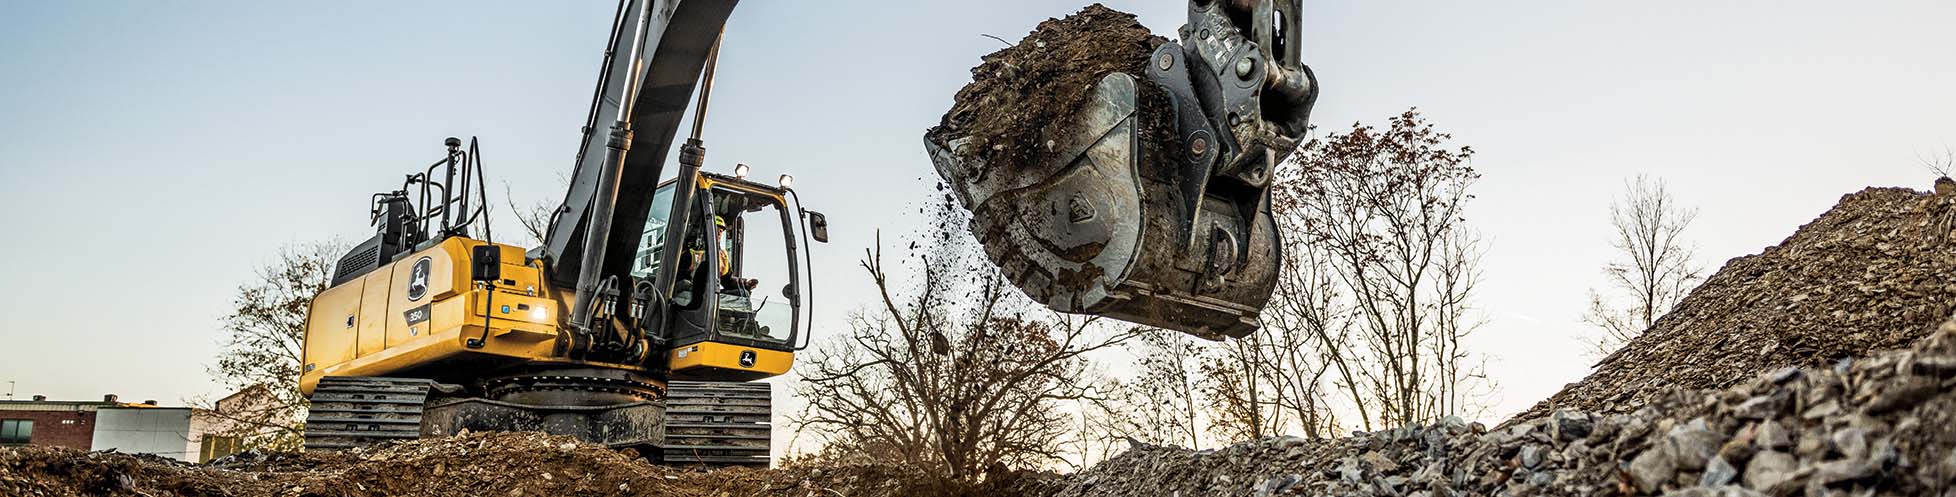 John Deere excavator powerfully lifts a bucket overflowing with dirt